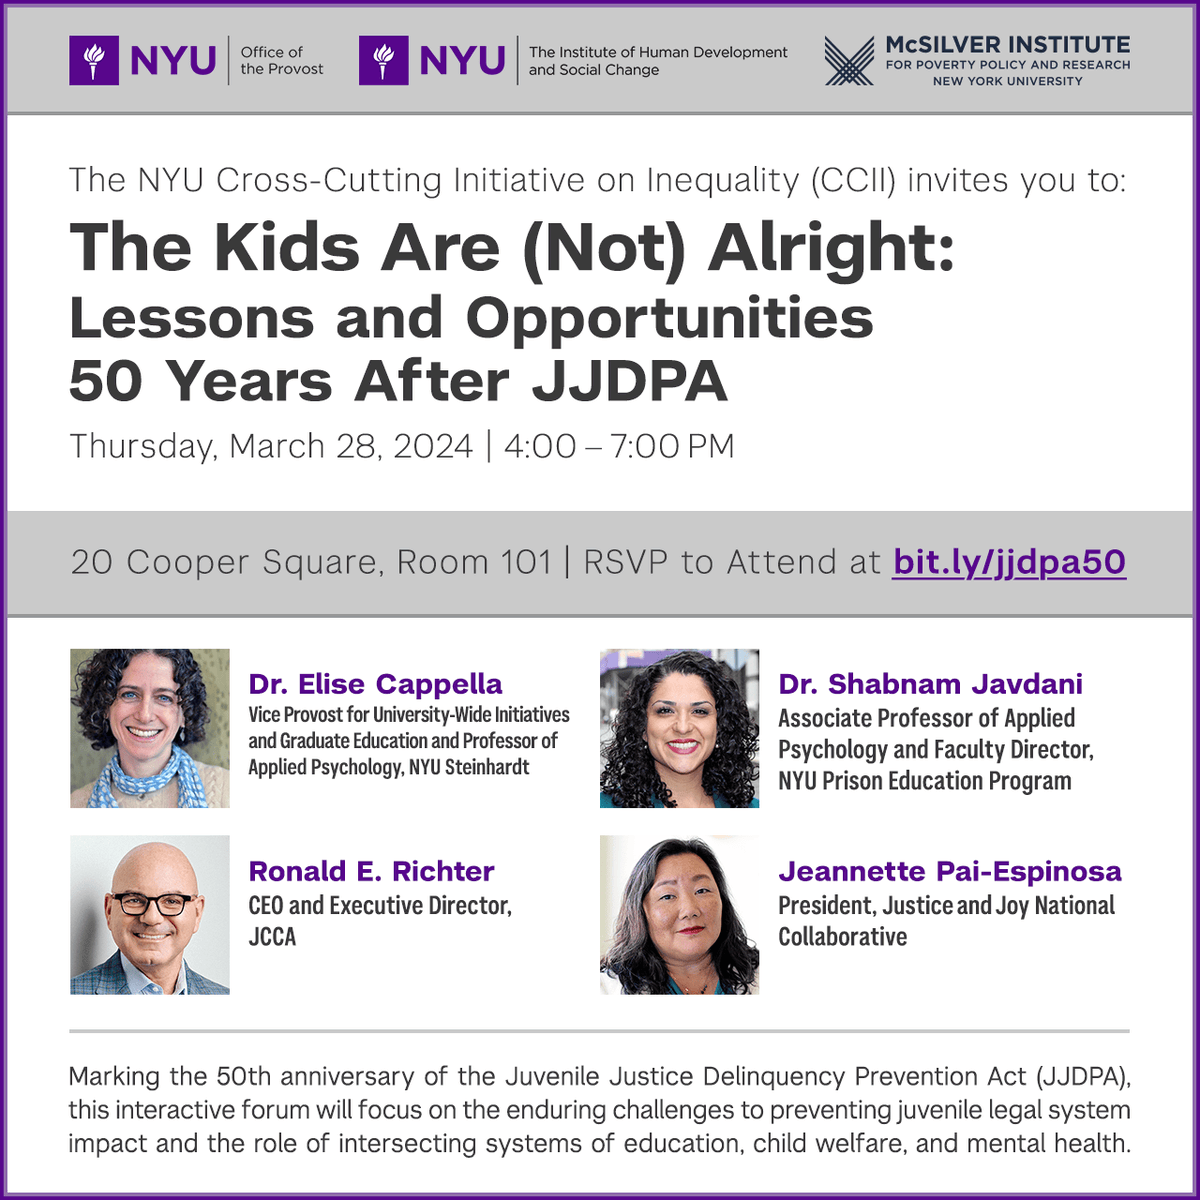 THURSDAY: Don't miss The Kids Are (Not) Alright: Lessons and Opportunities 50 Years After JJDPA. Hear from top experts on youth, community strengthening, and inequality in our criminal justice system. Learn more and RSVP to attend: createsend.com/t/i-593DB53918…